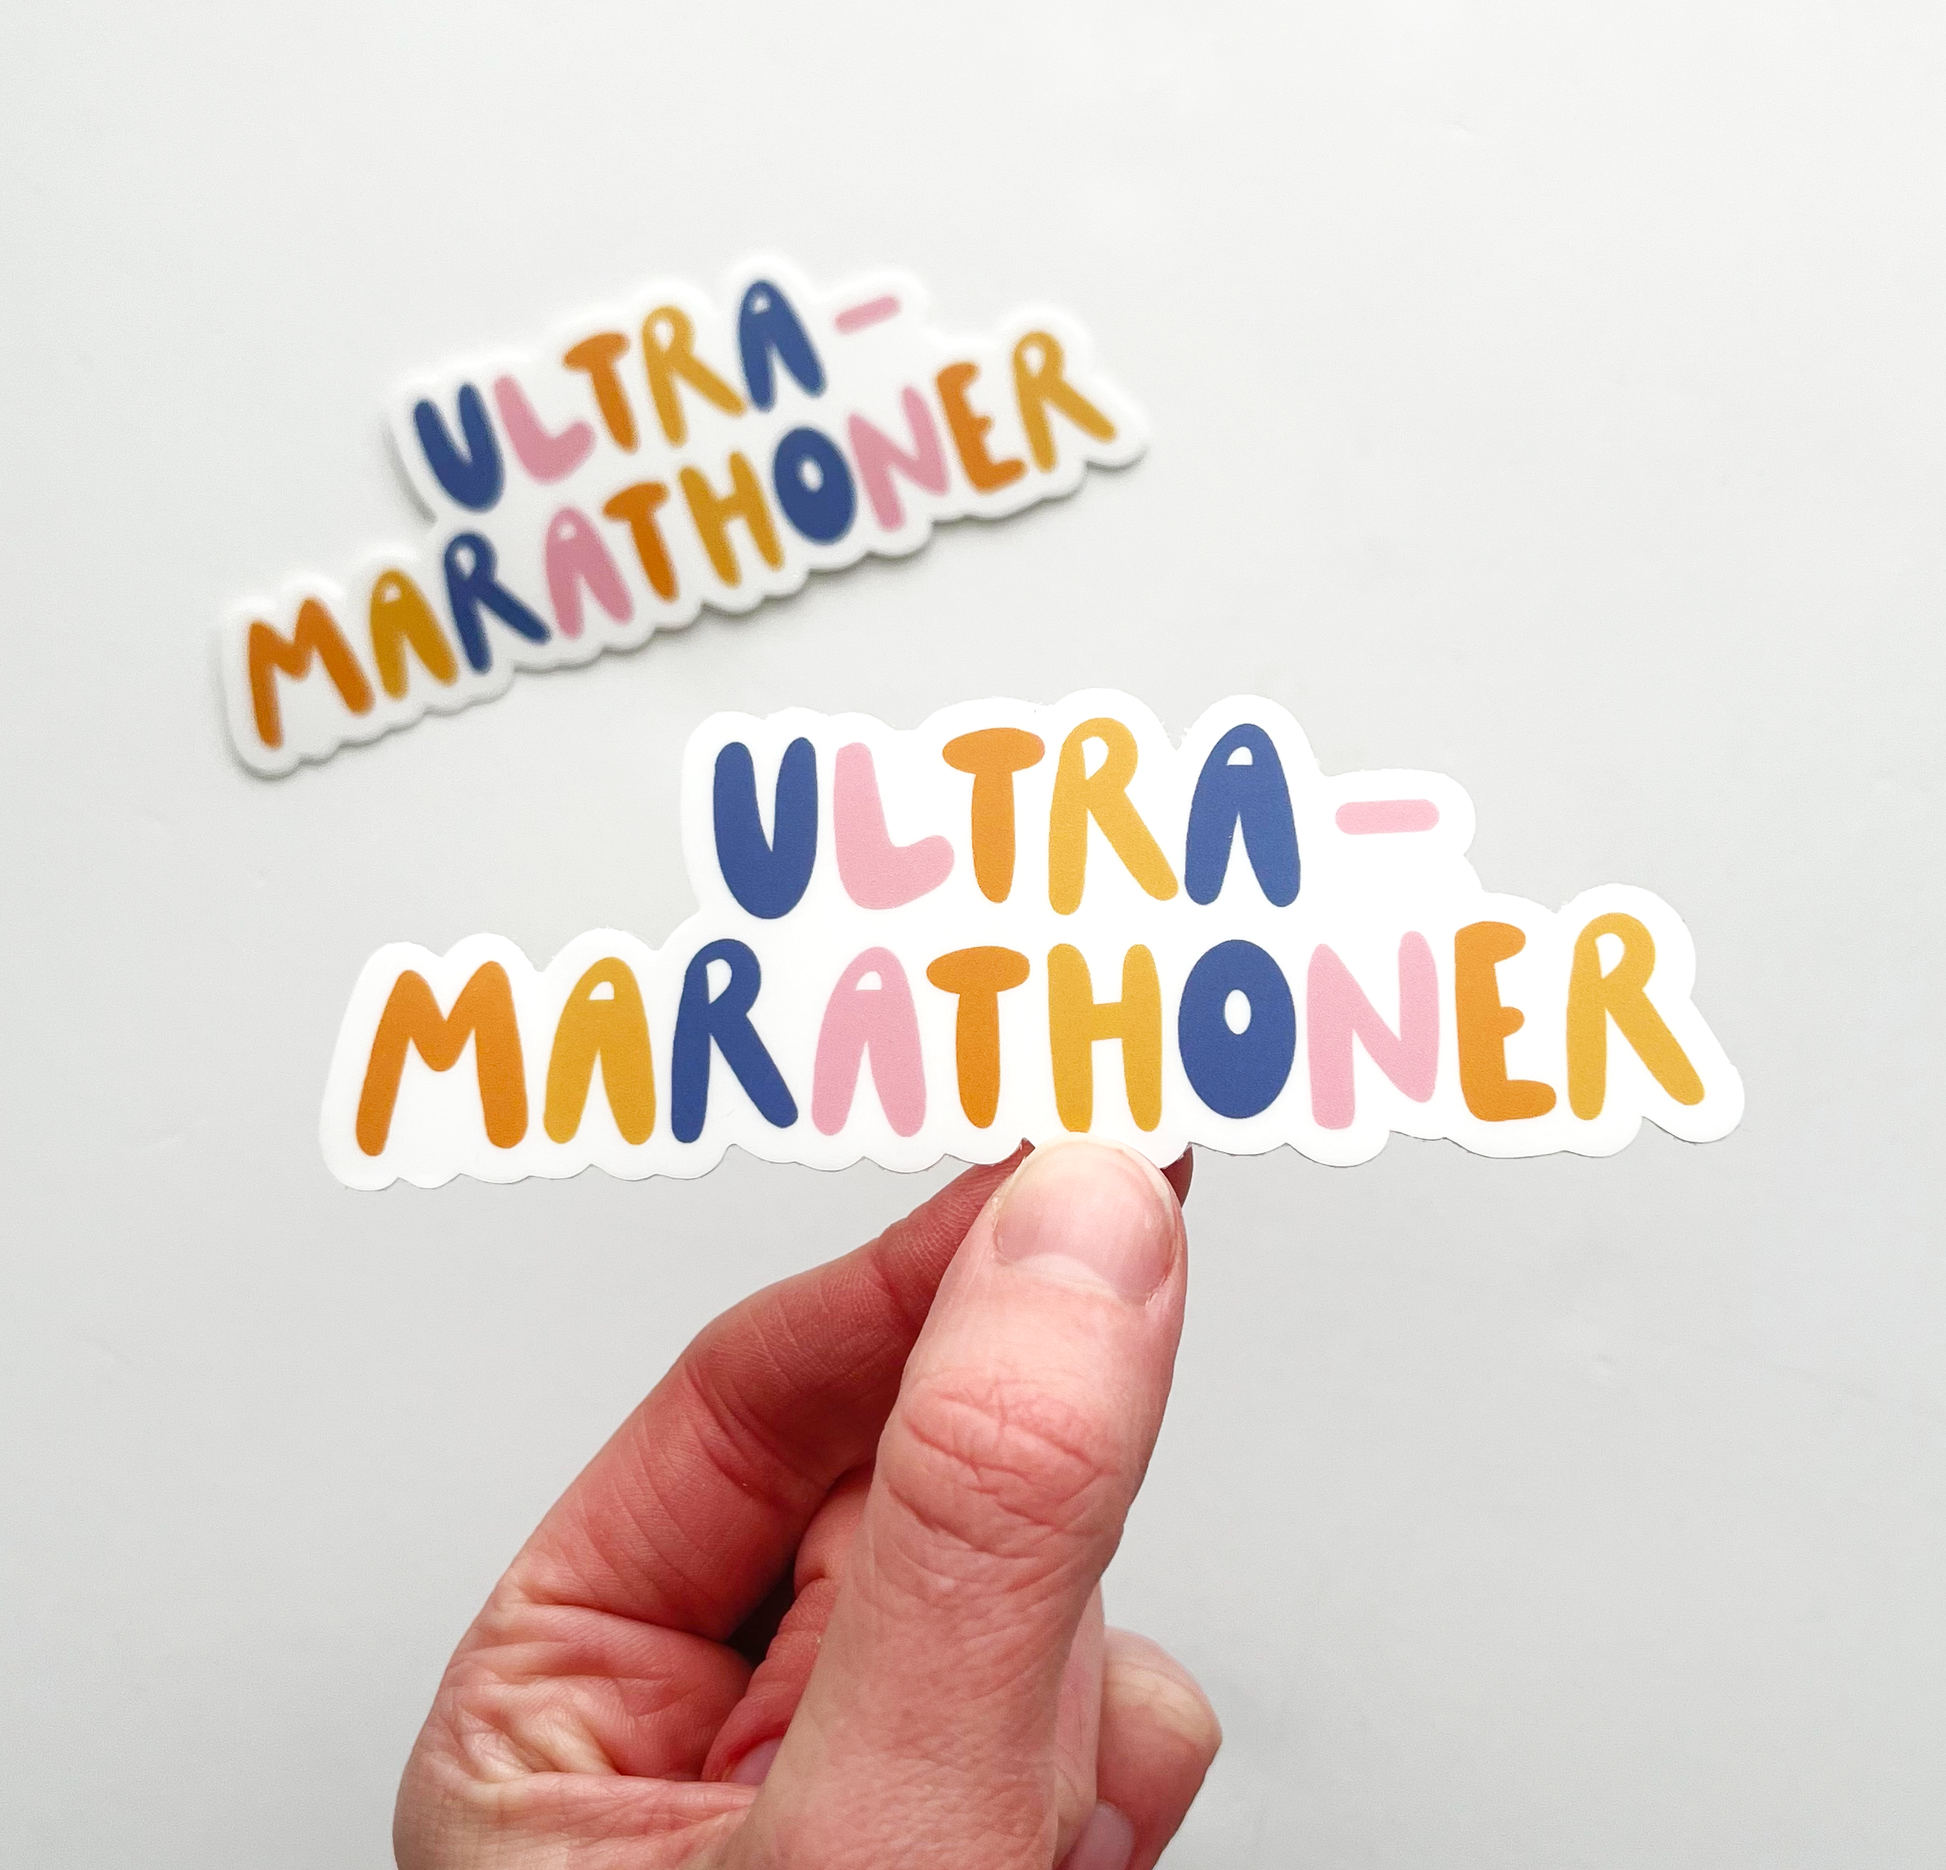 Hand holding ultramarathoner sticker. Sticker is written with bubble letters and alternating colors of navy, pink, orange and yellow.